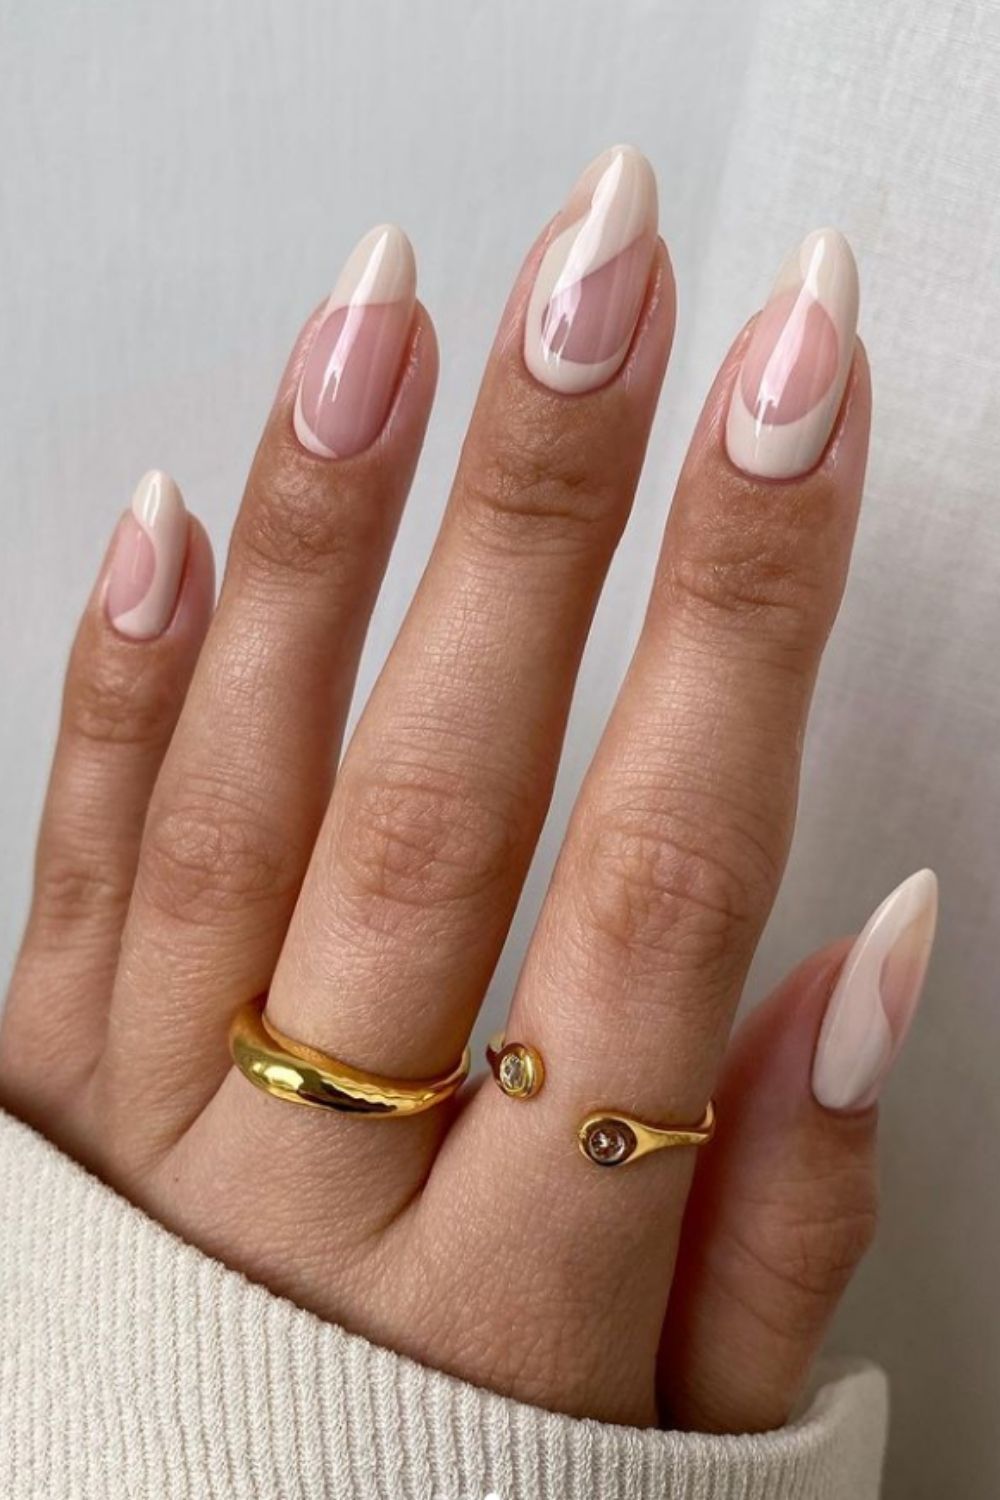 White and nude almond nails art